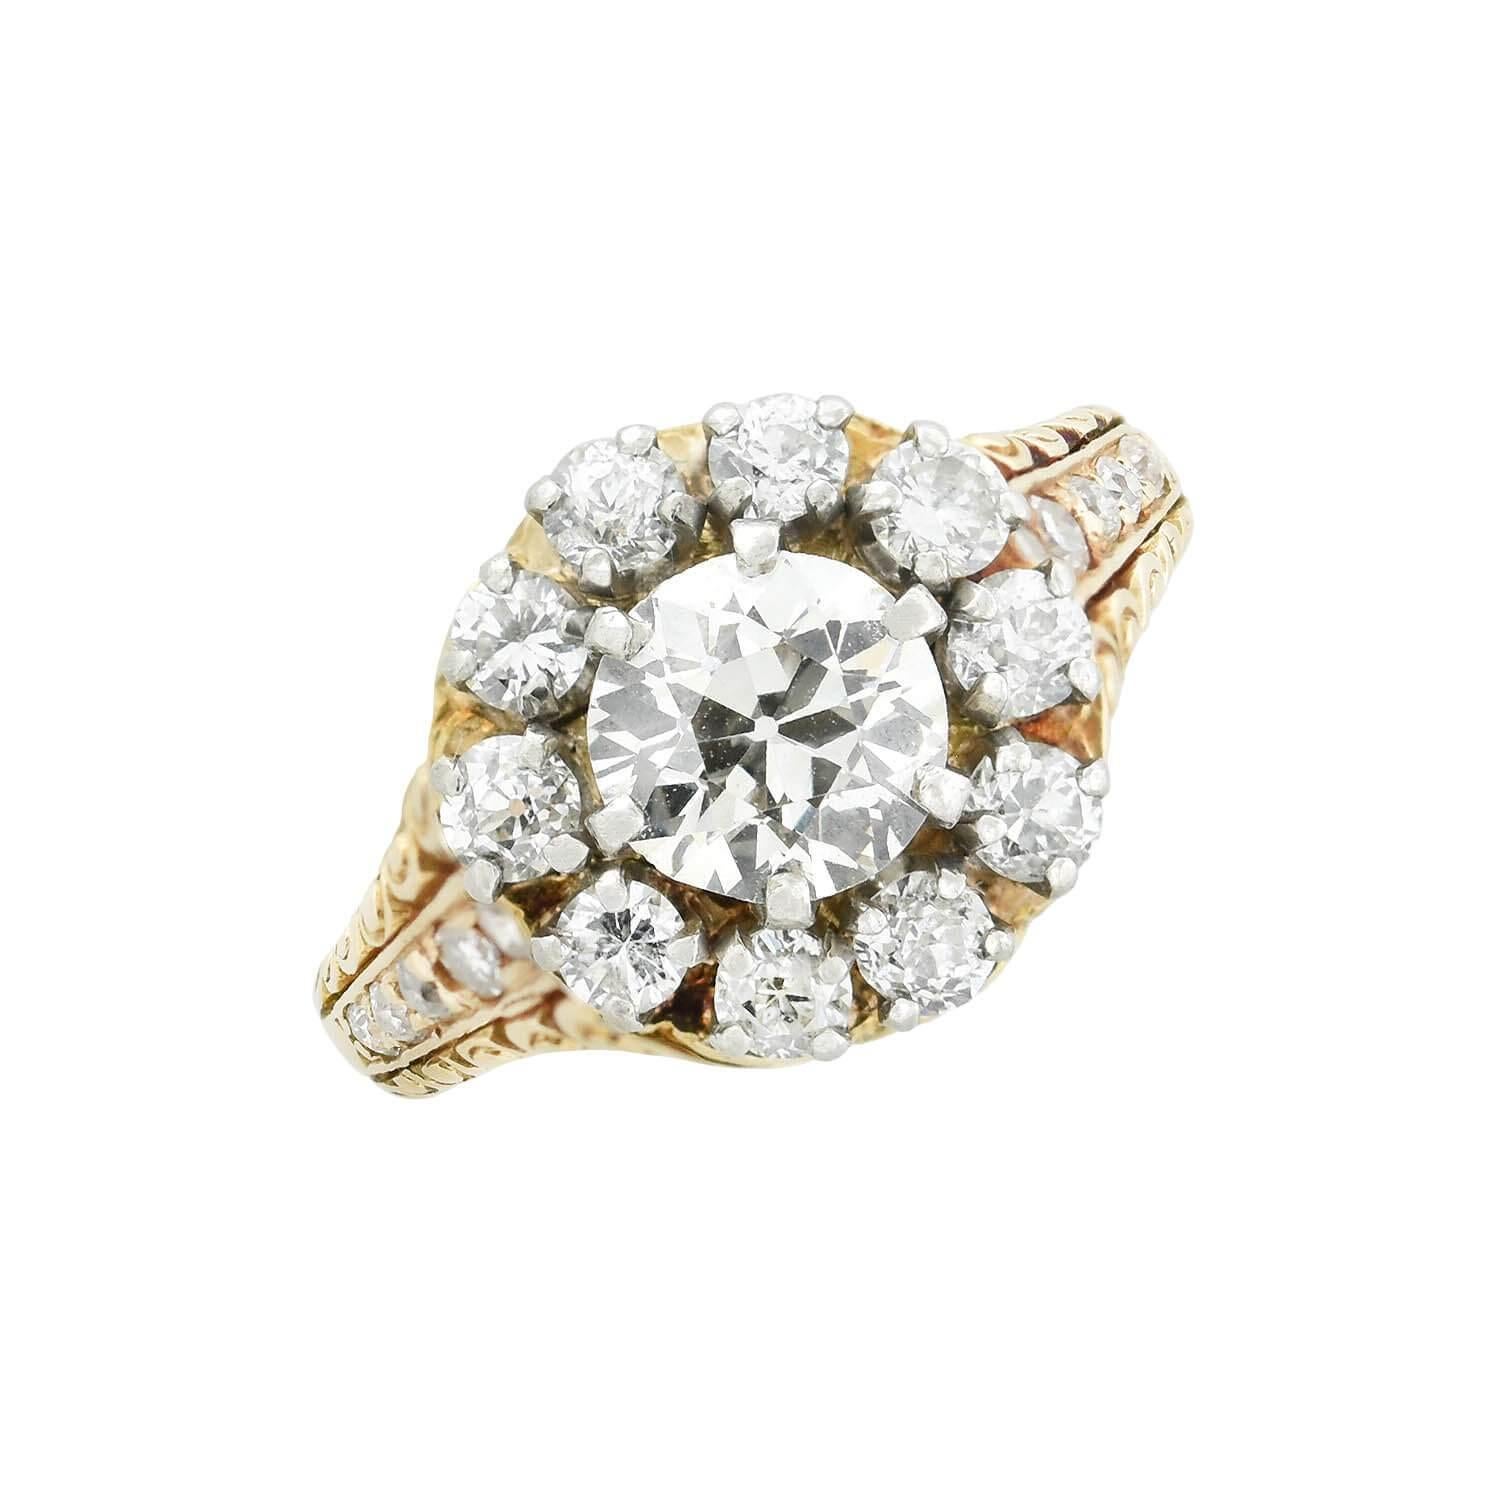 Victorian 18kt/Sterling Diamond Cluster Ring 2ctw In Good Condition For Sale In Narberth, PA